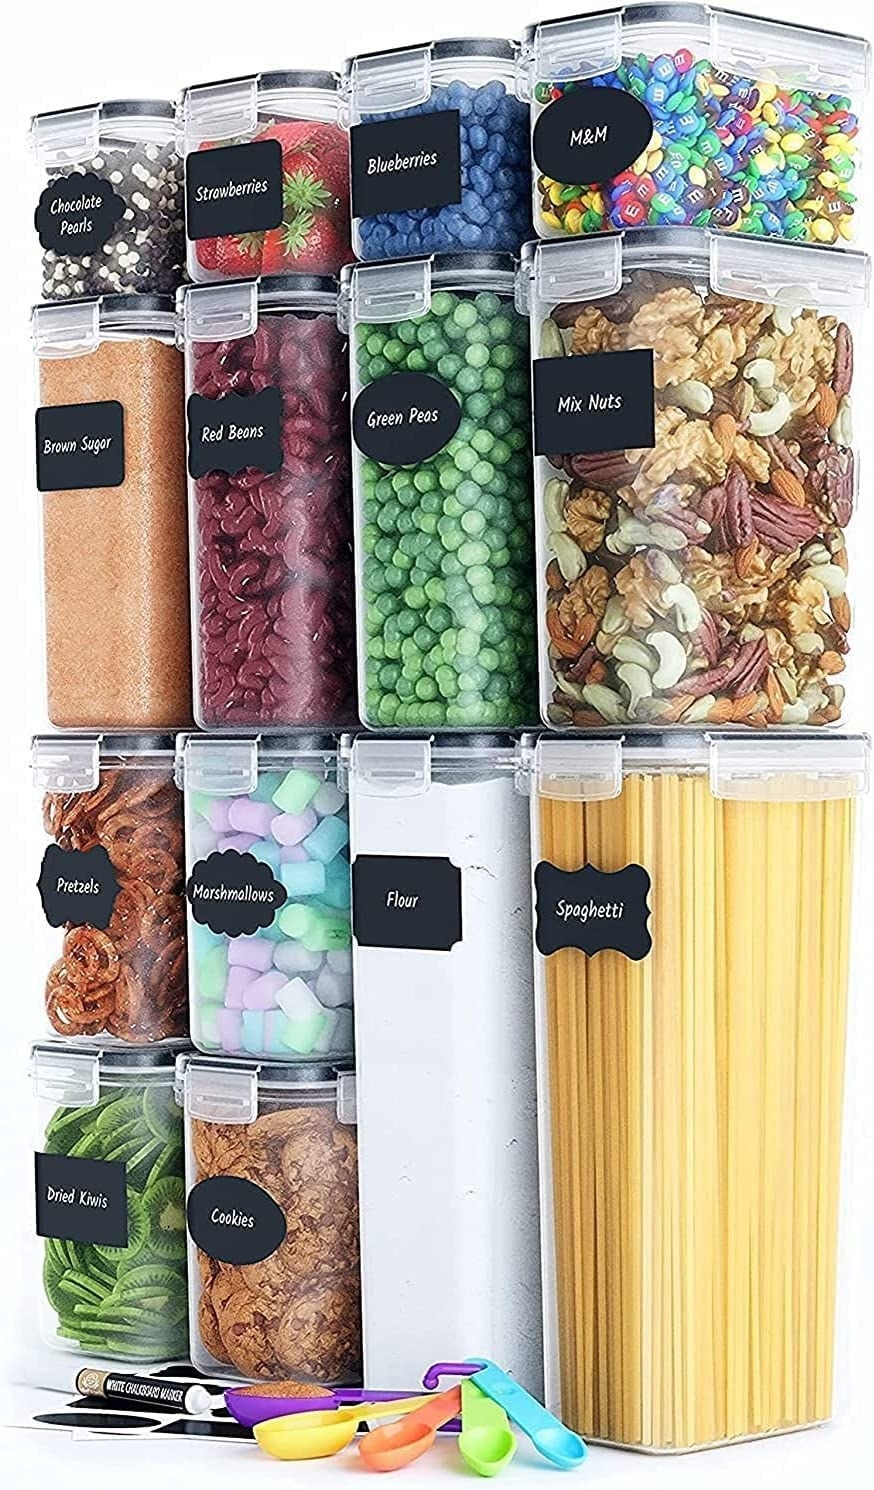 14 containers with snap on lids, labels, and a set of measuring spoons